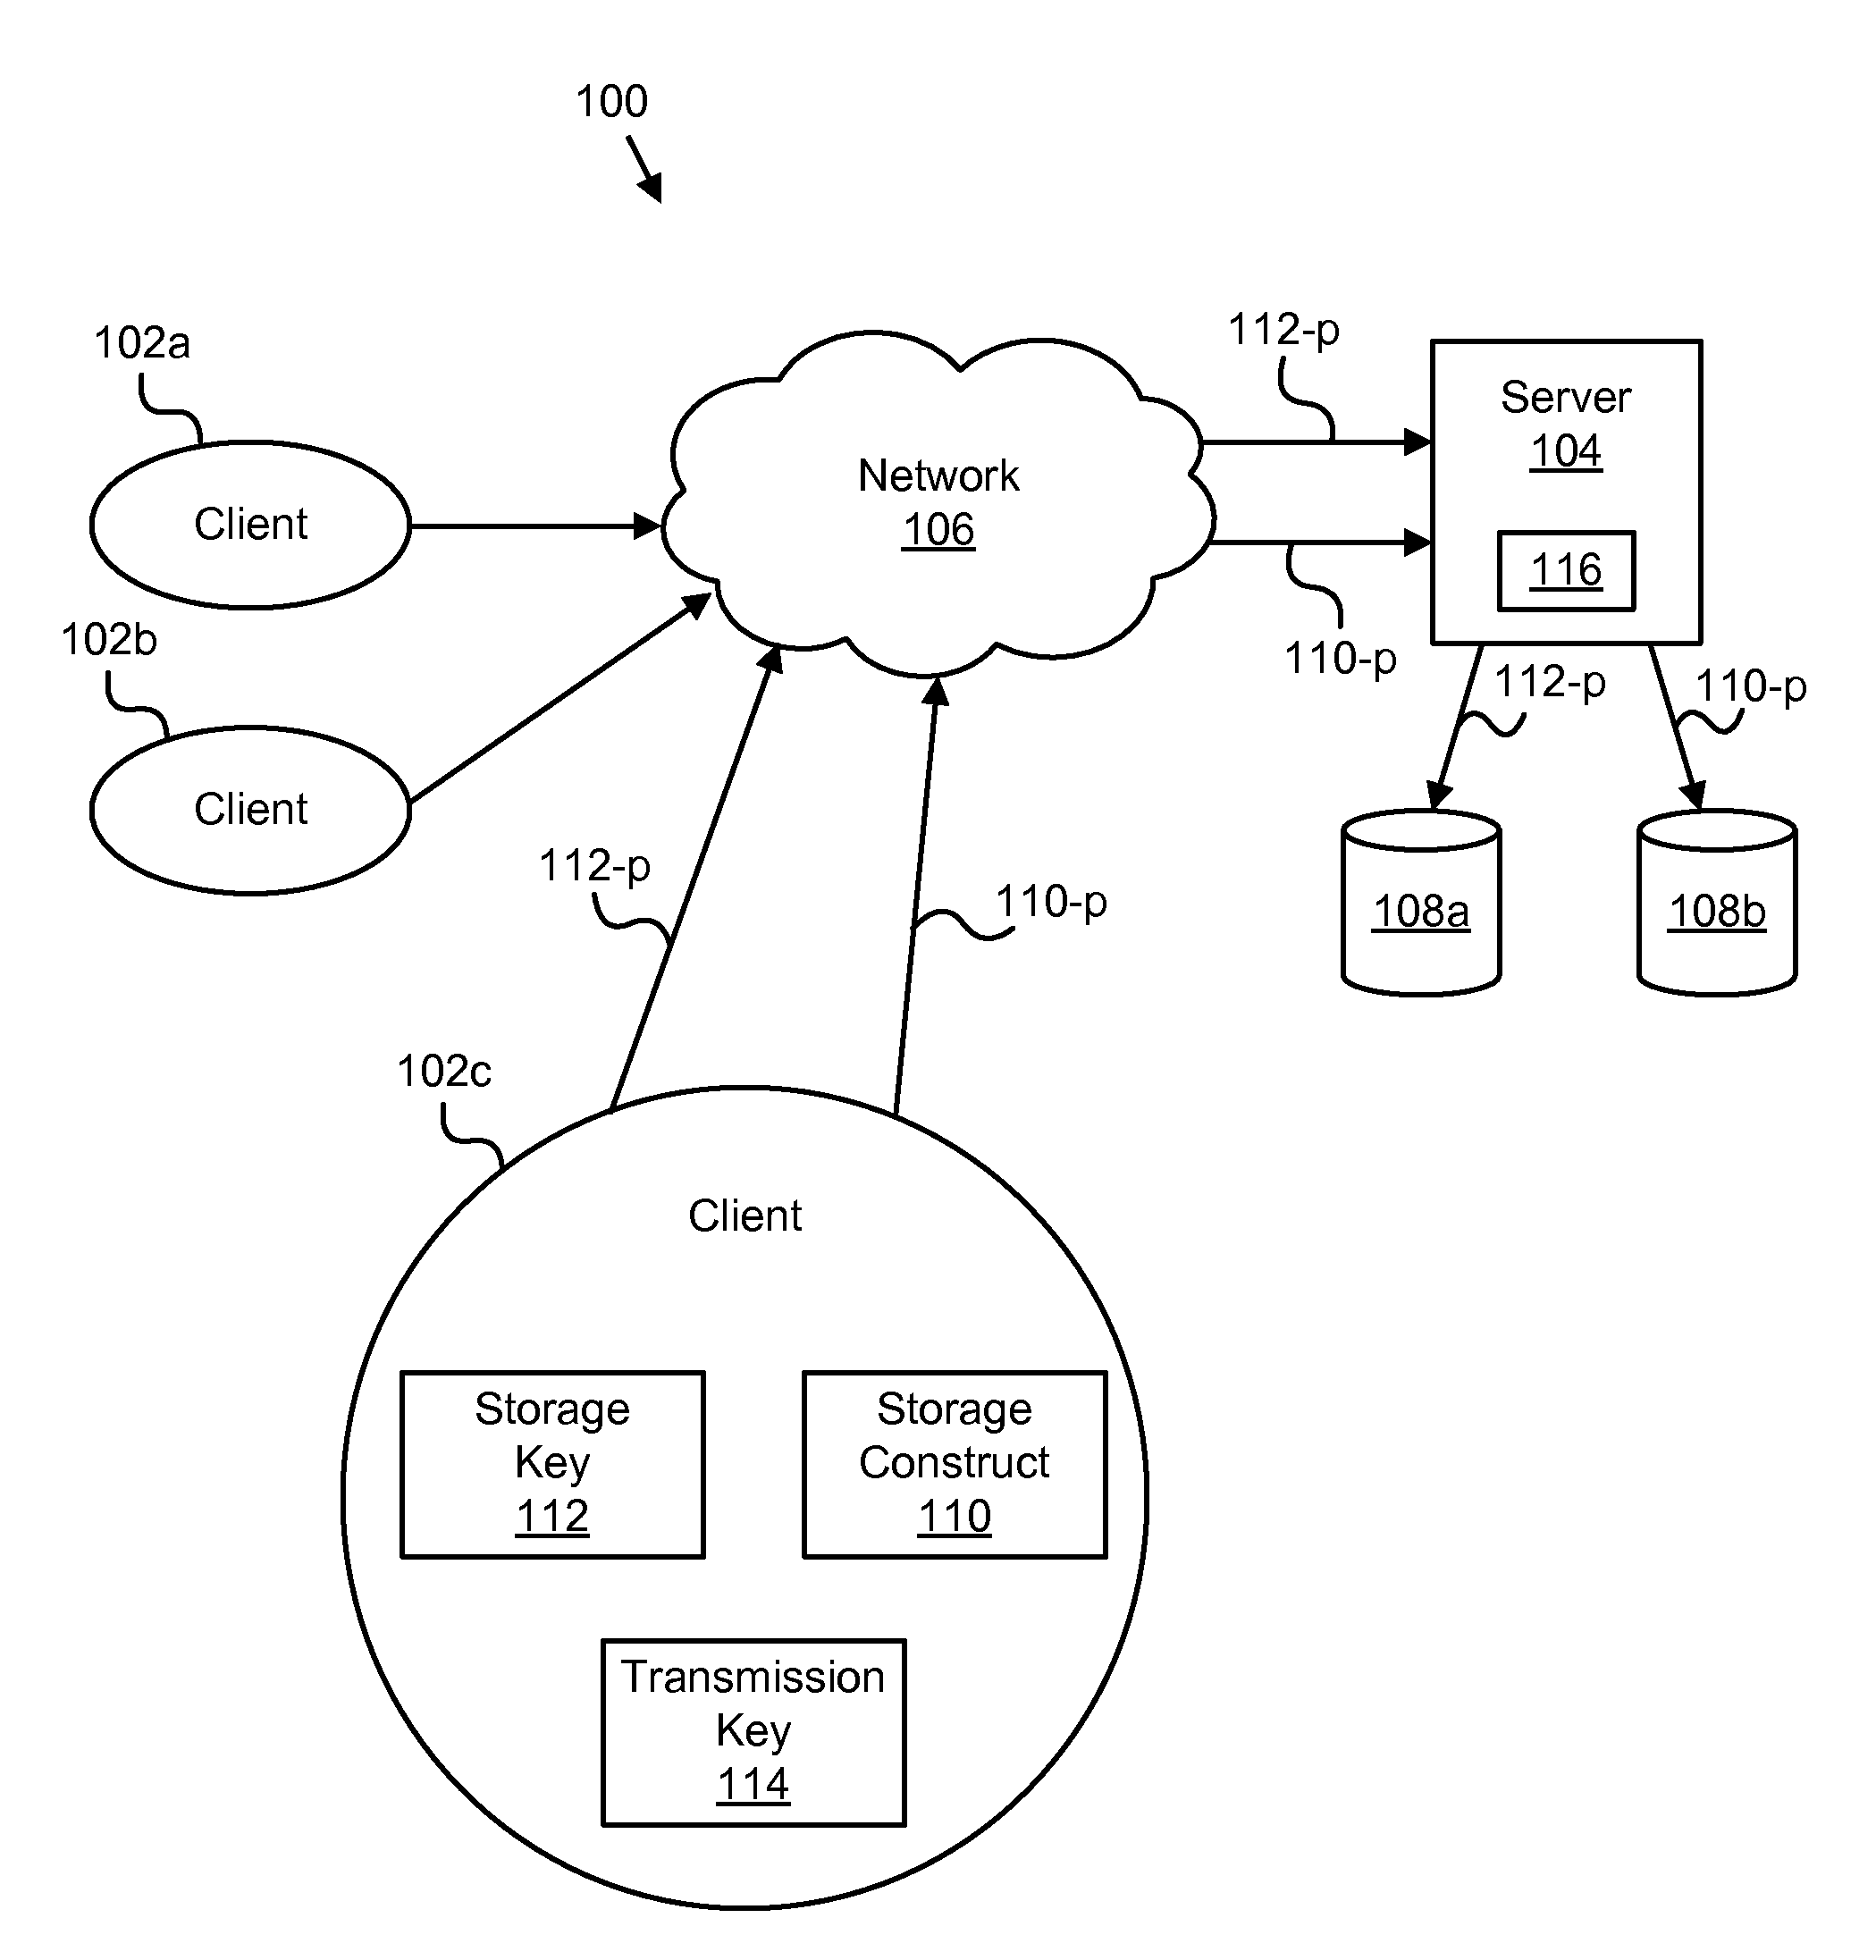 Apparatus, system, and method for transparent end-to-end security of storage data in a client-server environment